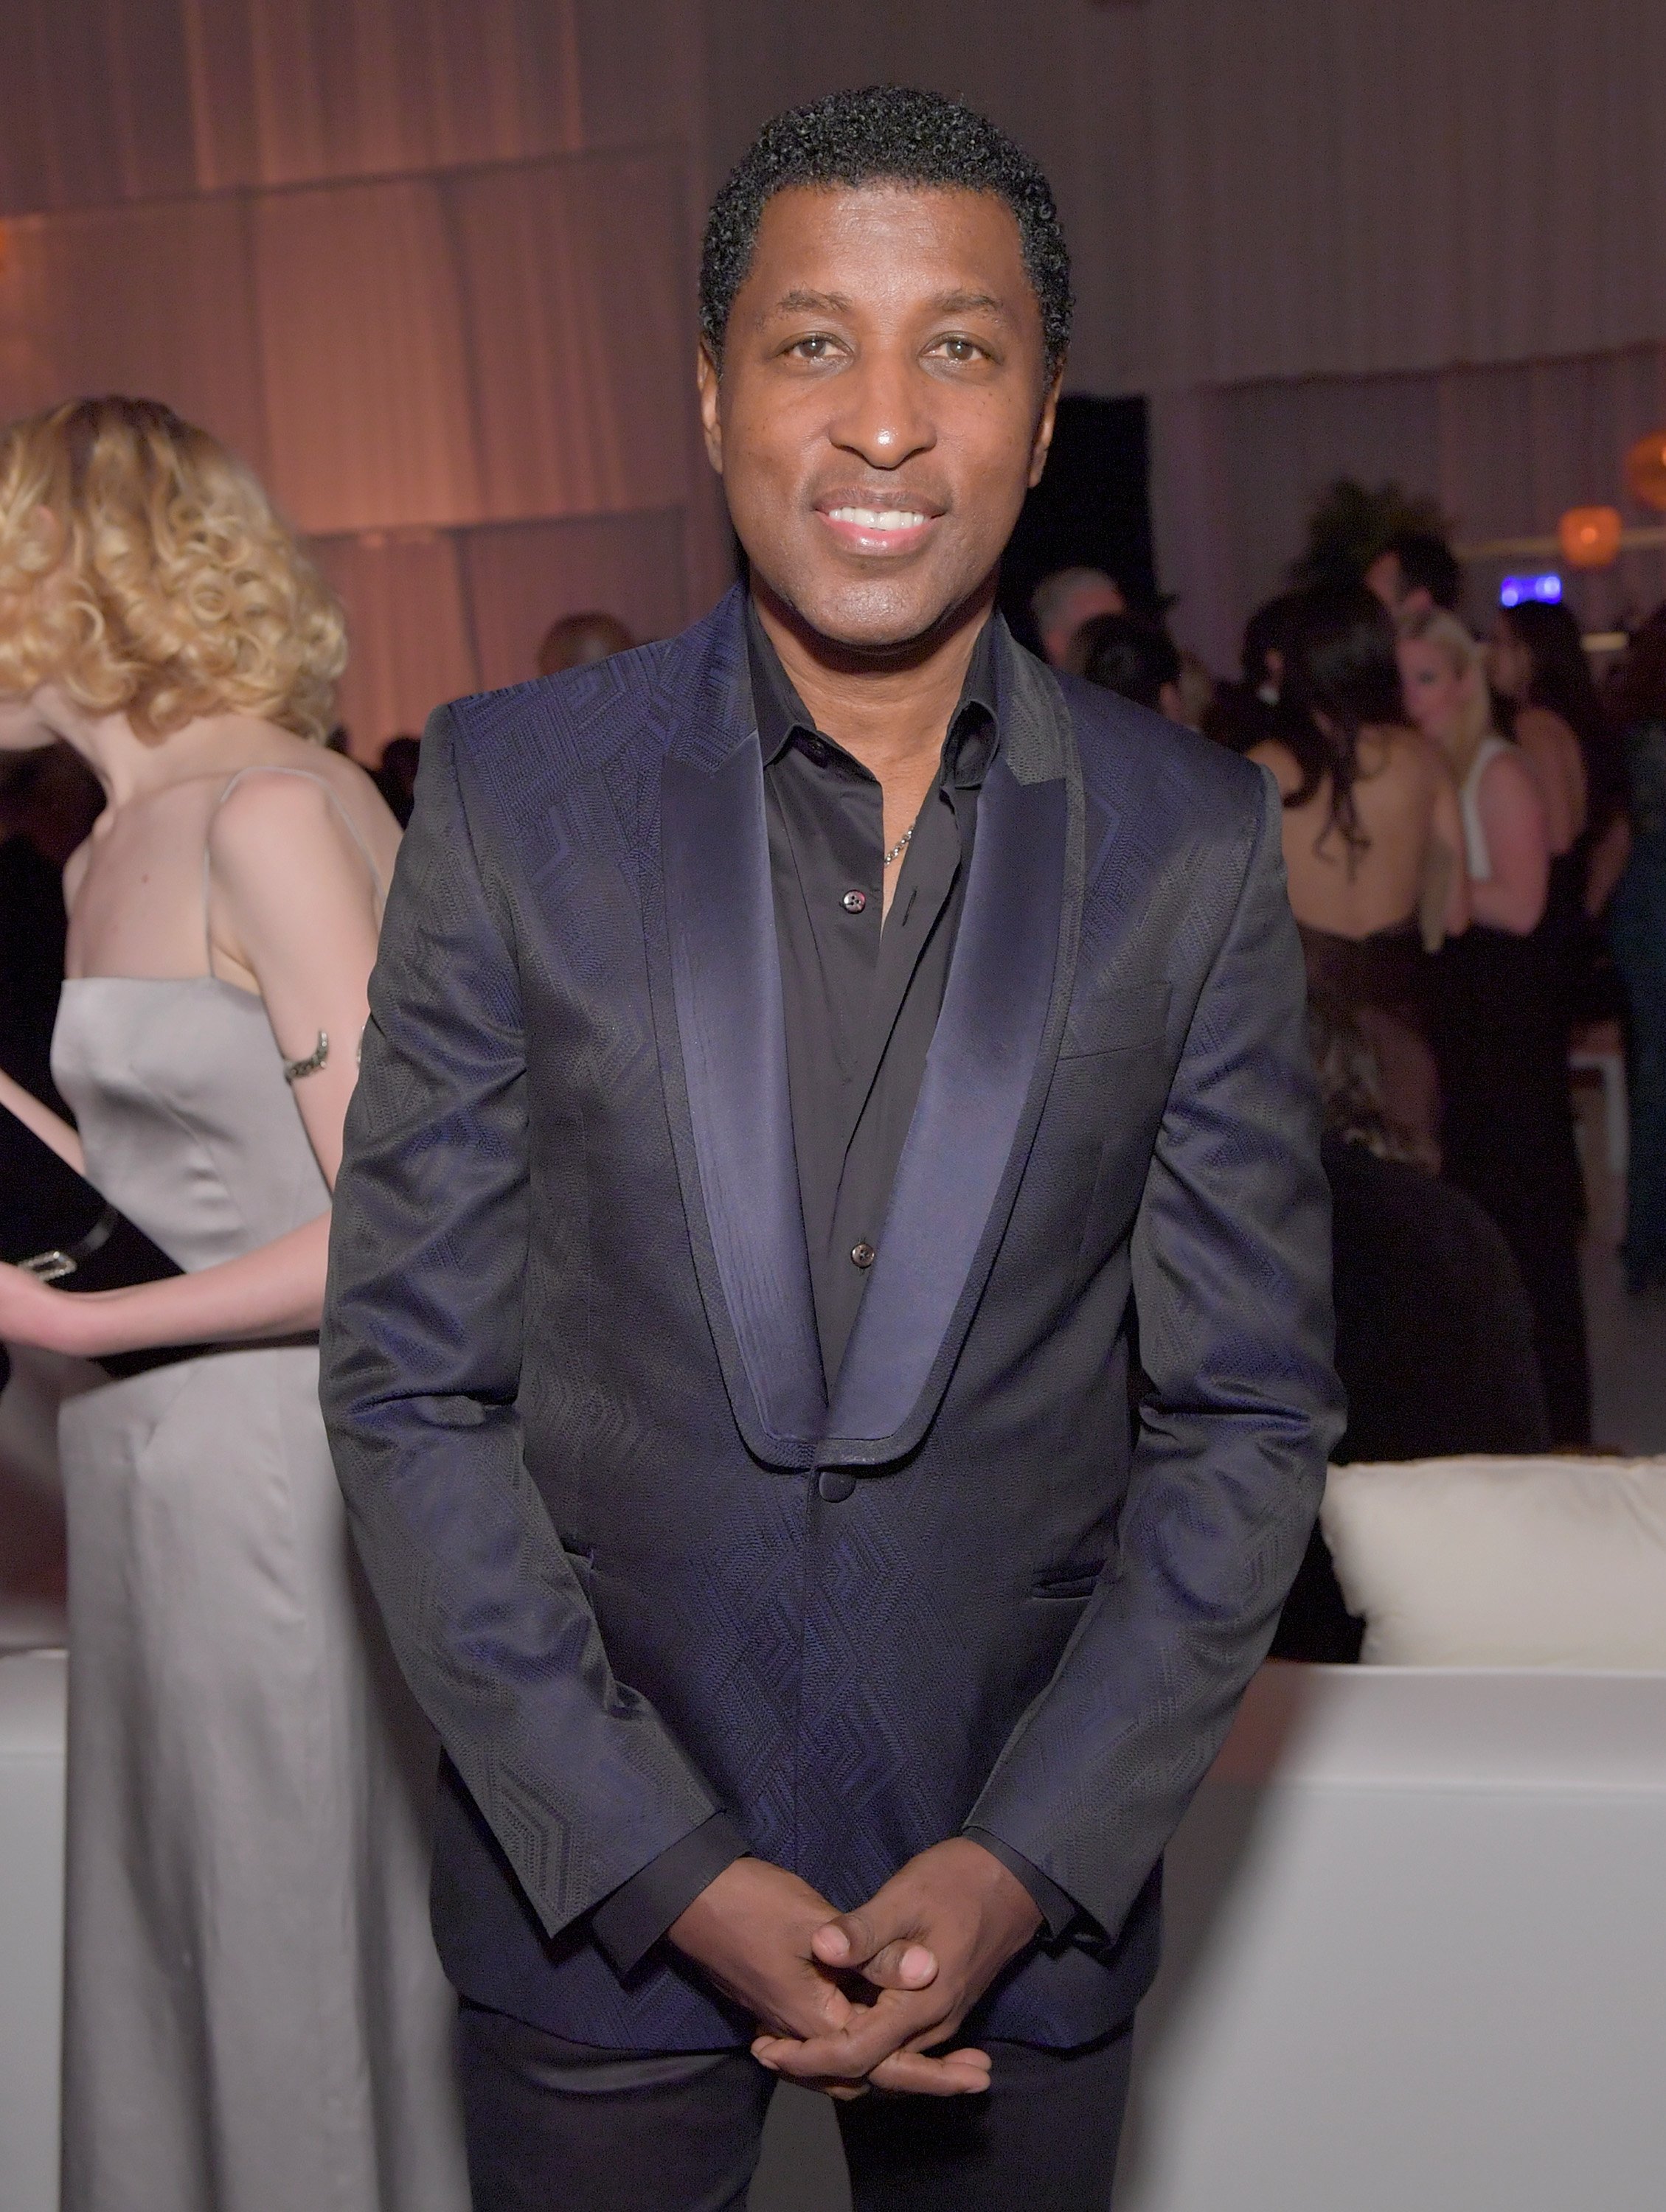 Singer/Songwriter Babyface at music event in January 2017. | Photo: Getty Images